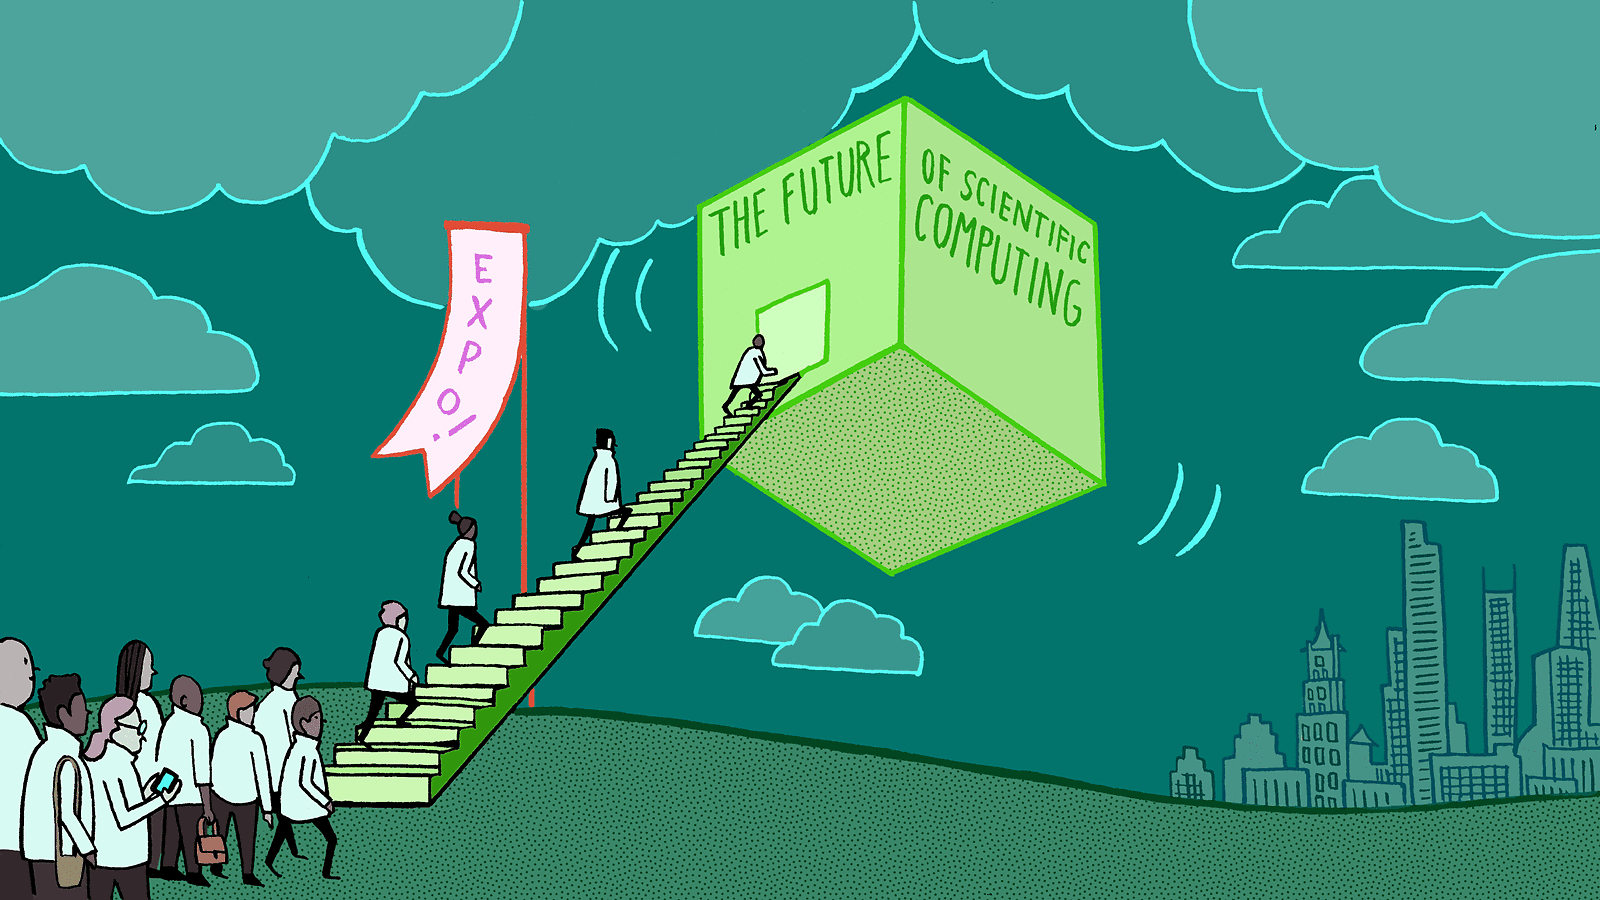 Scientists walking up stairs to cube floating in sky "the future of scientists computing"